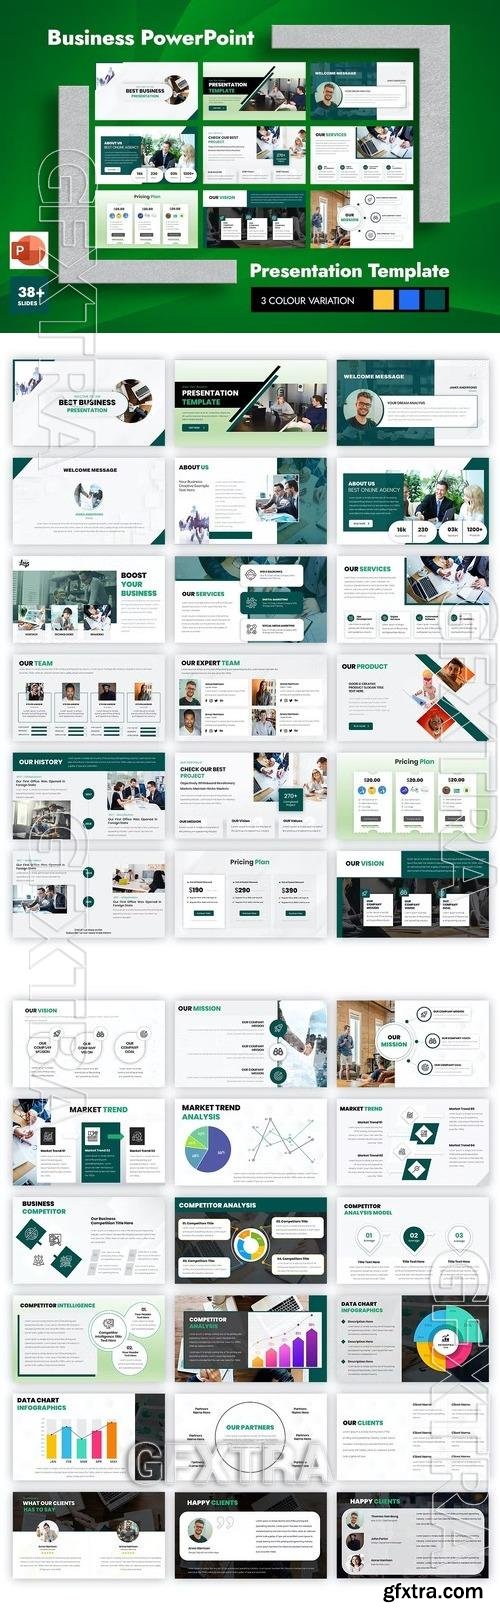 About Company PowerPoint Presentation Template JZH3LH7